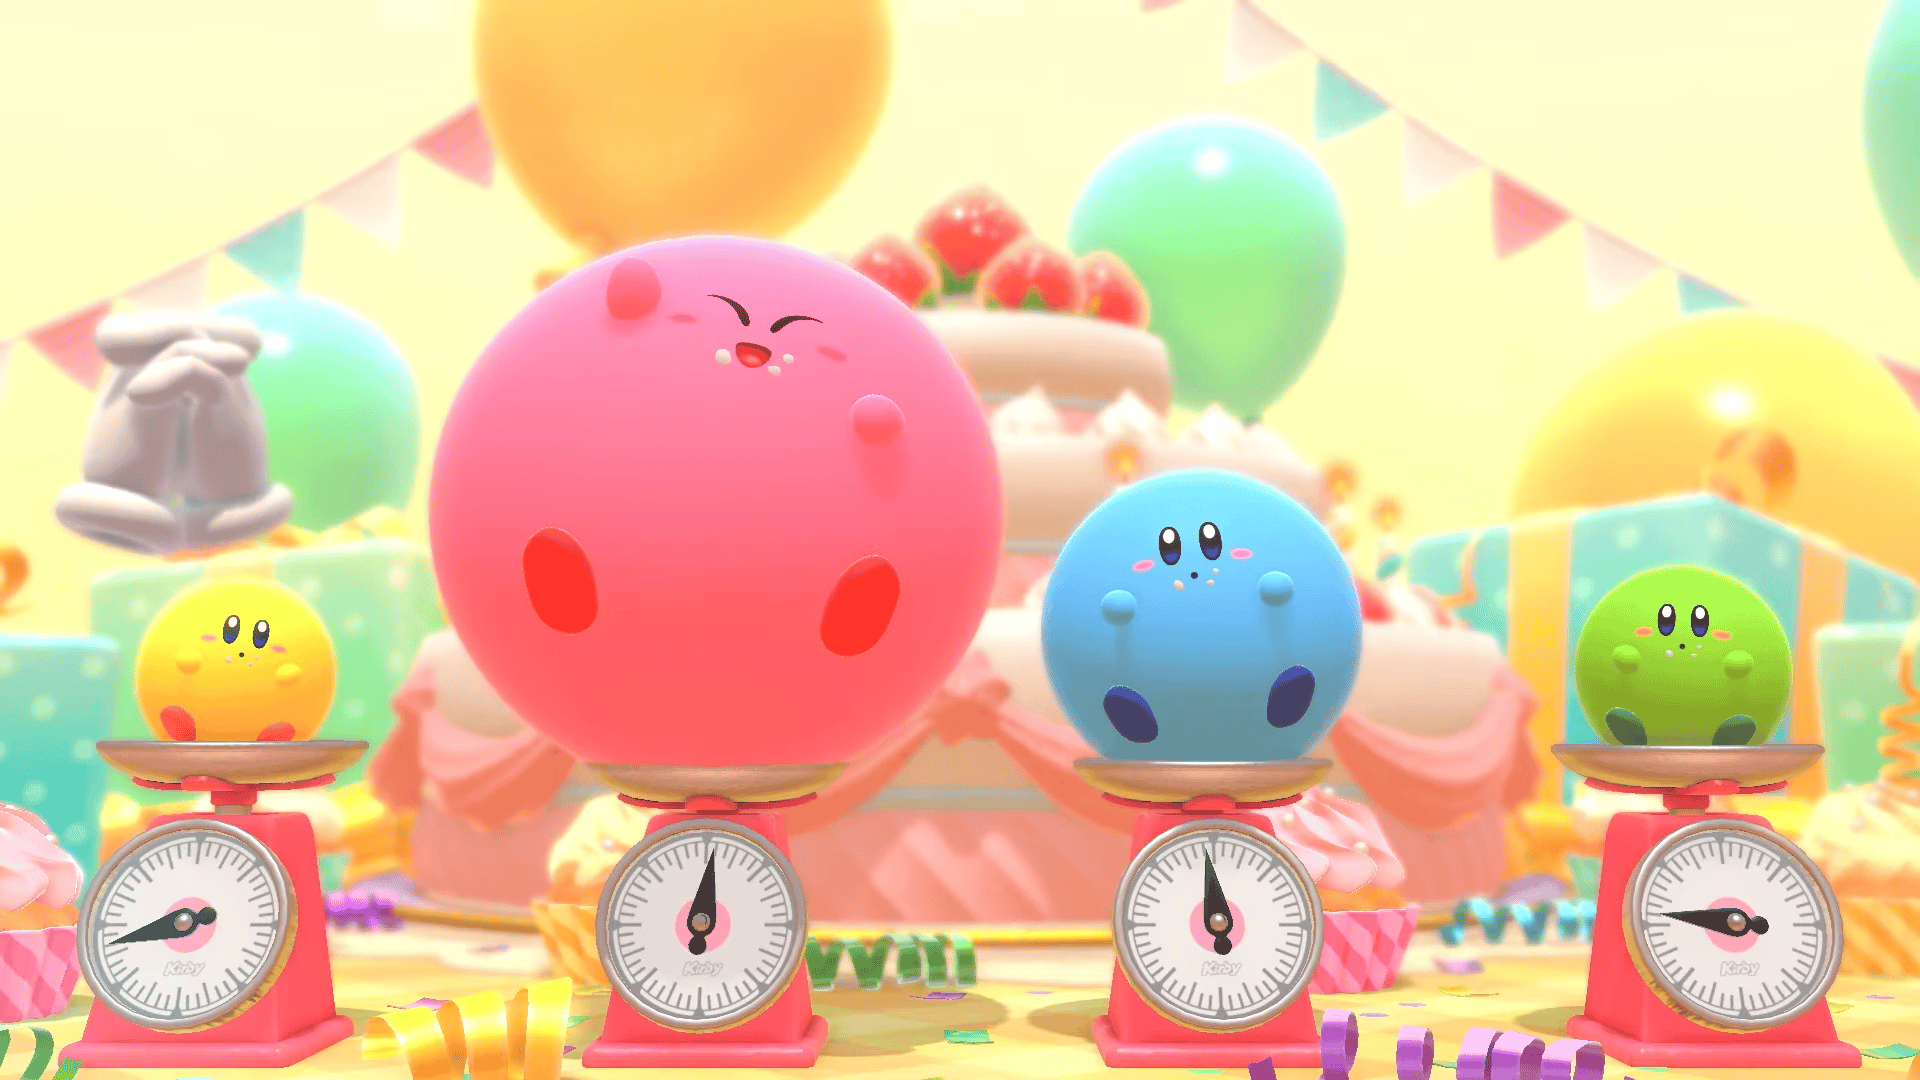 Kirby’s Dream Buffet Details 3 Gameplay Modes, Cosmetics, Unlockables, Multiplayer & More; Launches Next Week